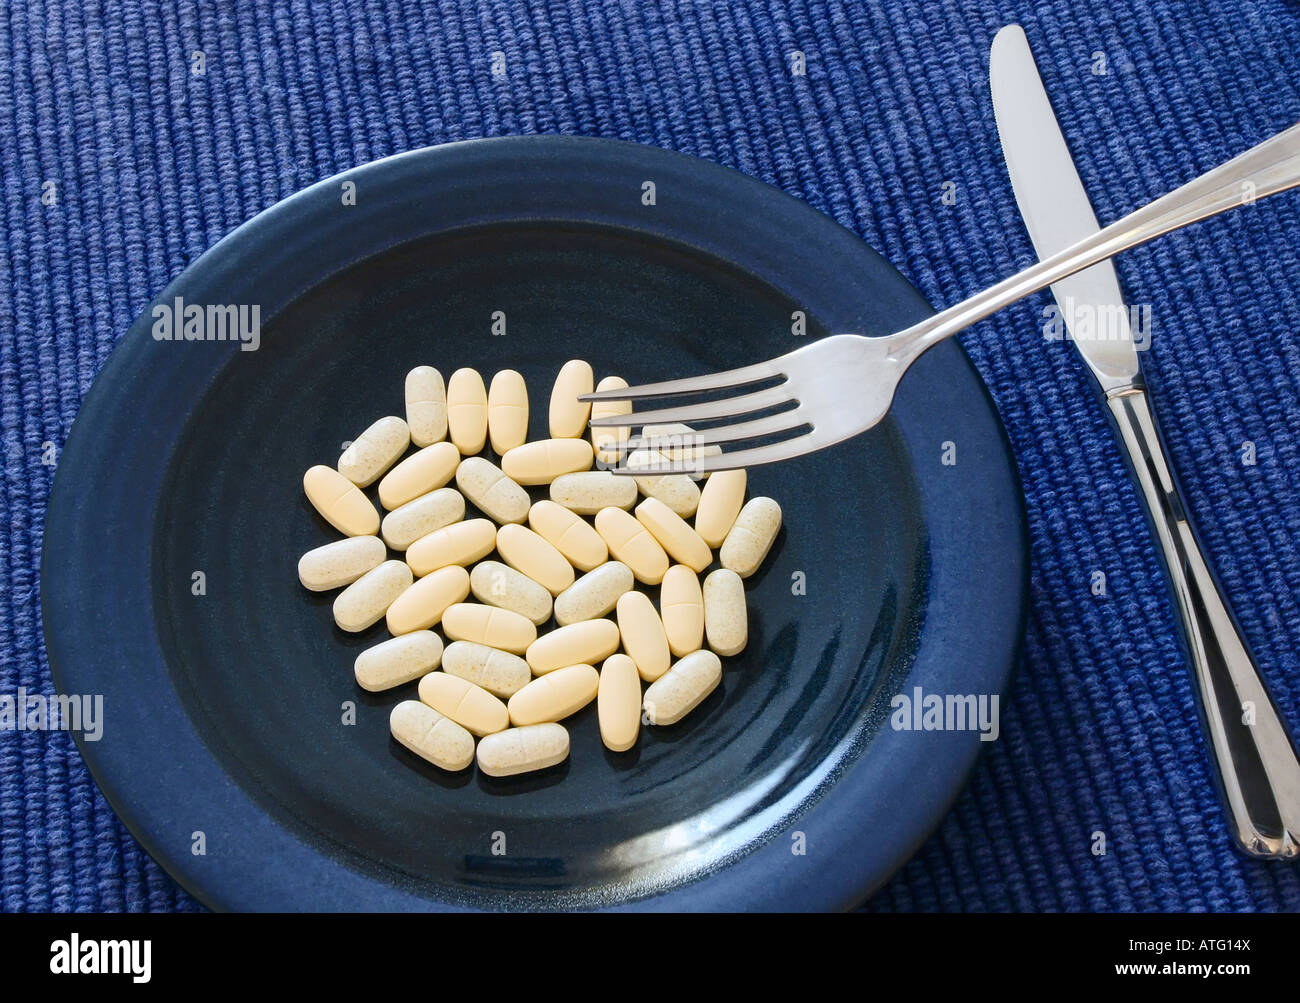 Vitamin supplements on a plate Stock Photo